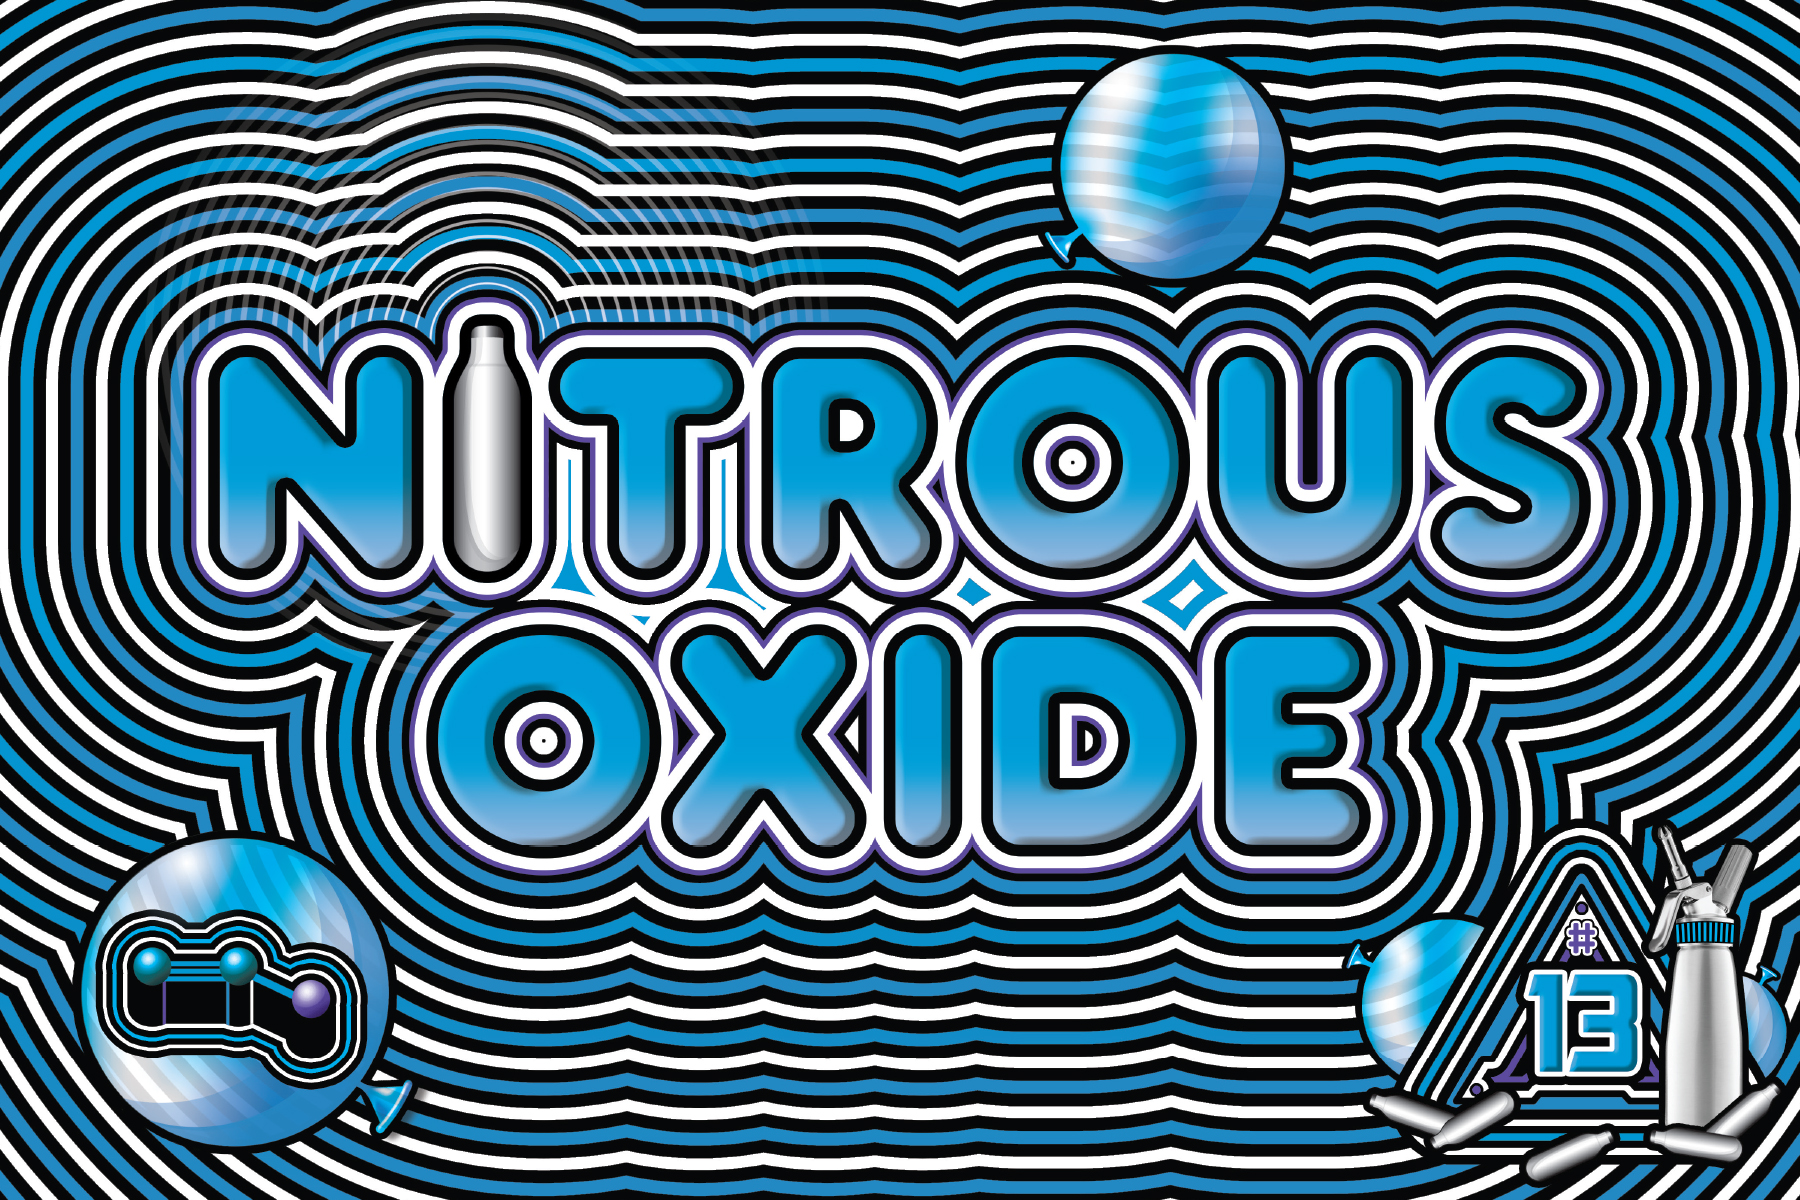 The front of the DanceSafe nitrous oxide card.